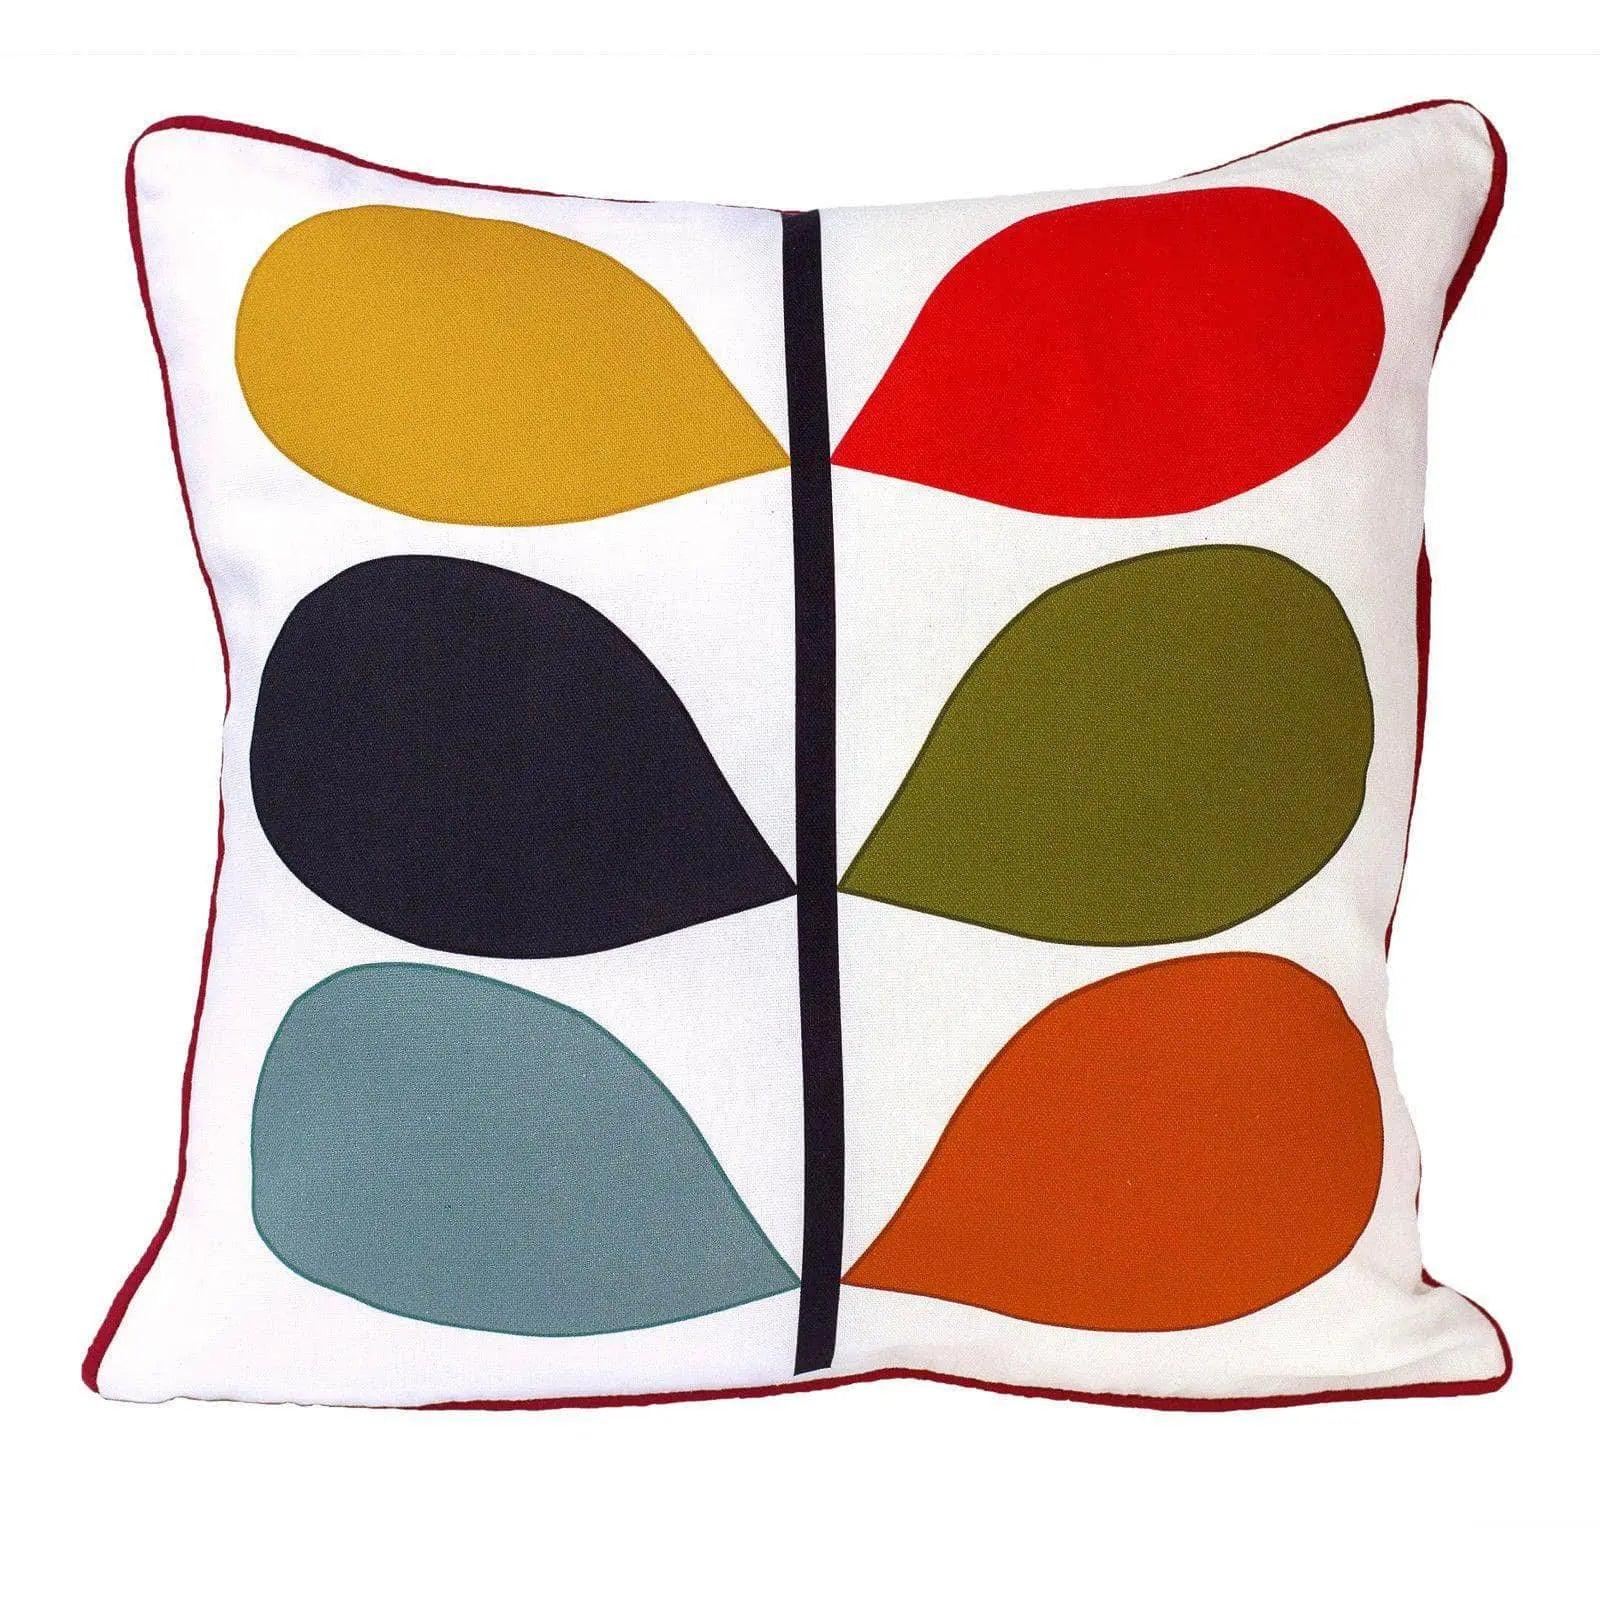 Digital Cushion Covers | Beautiful Designs And Best Quality - Arlinens